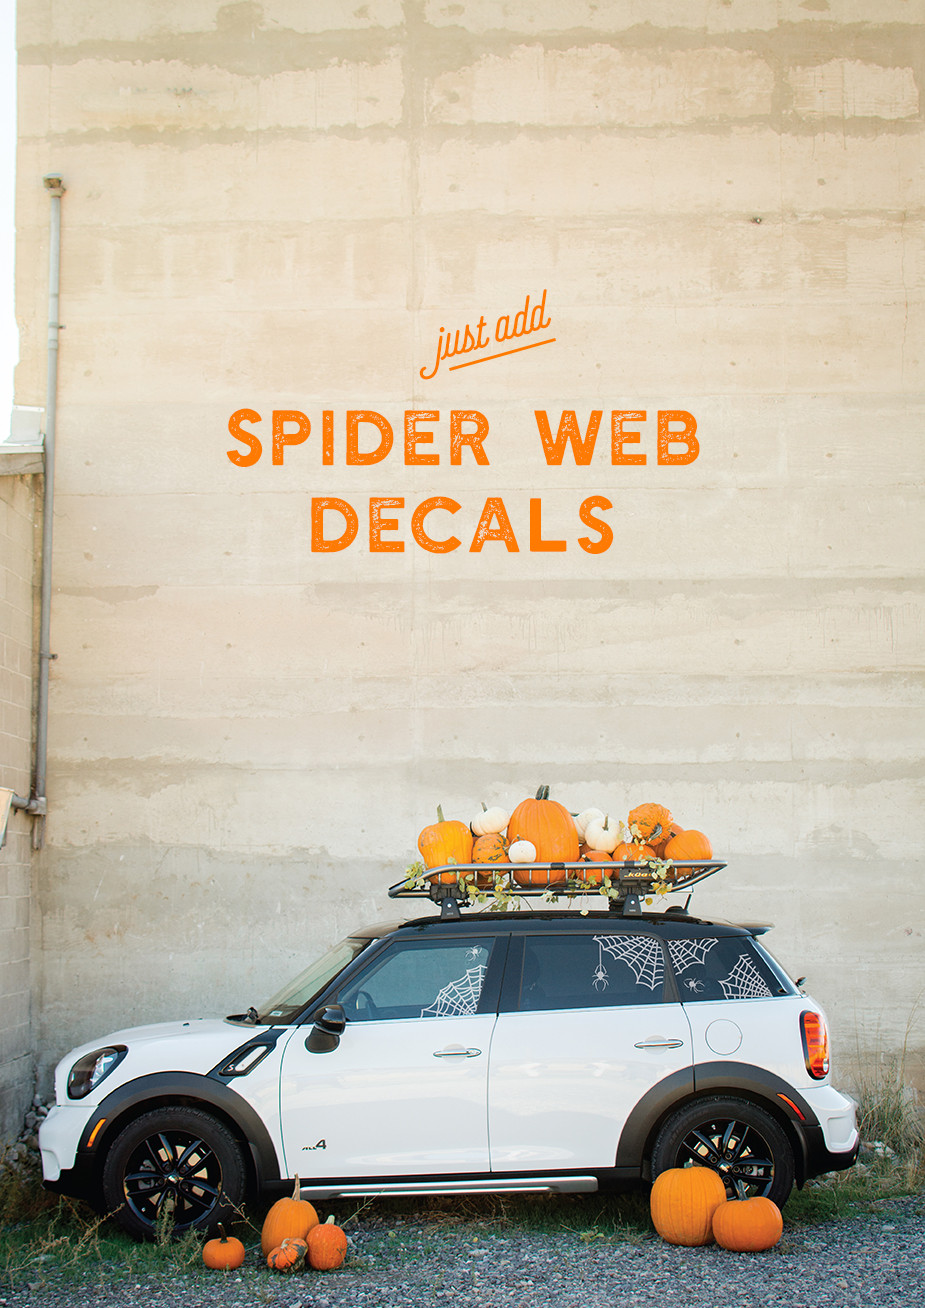 Add Spider web decals to your car